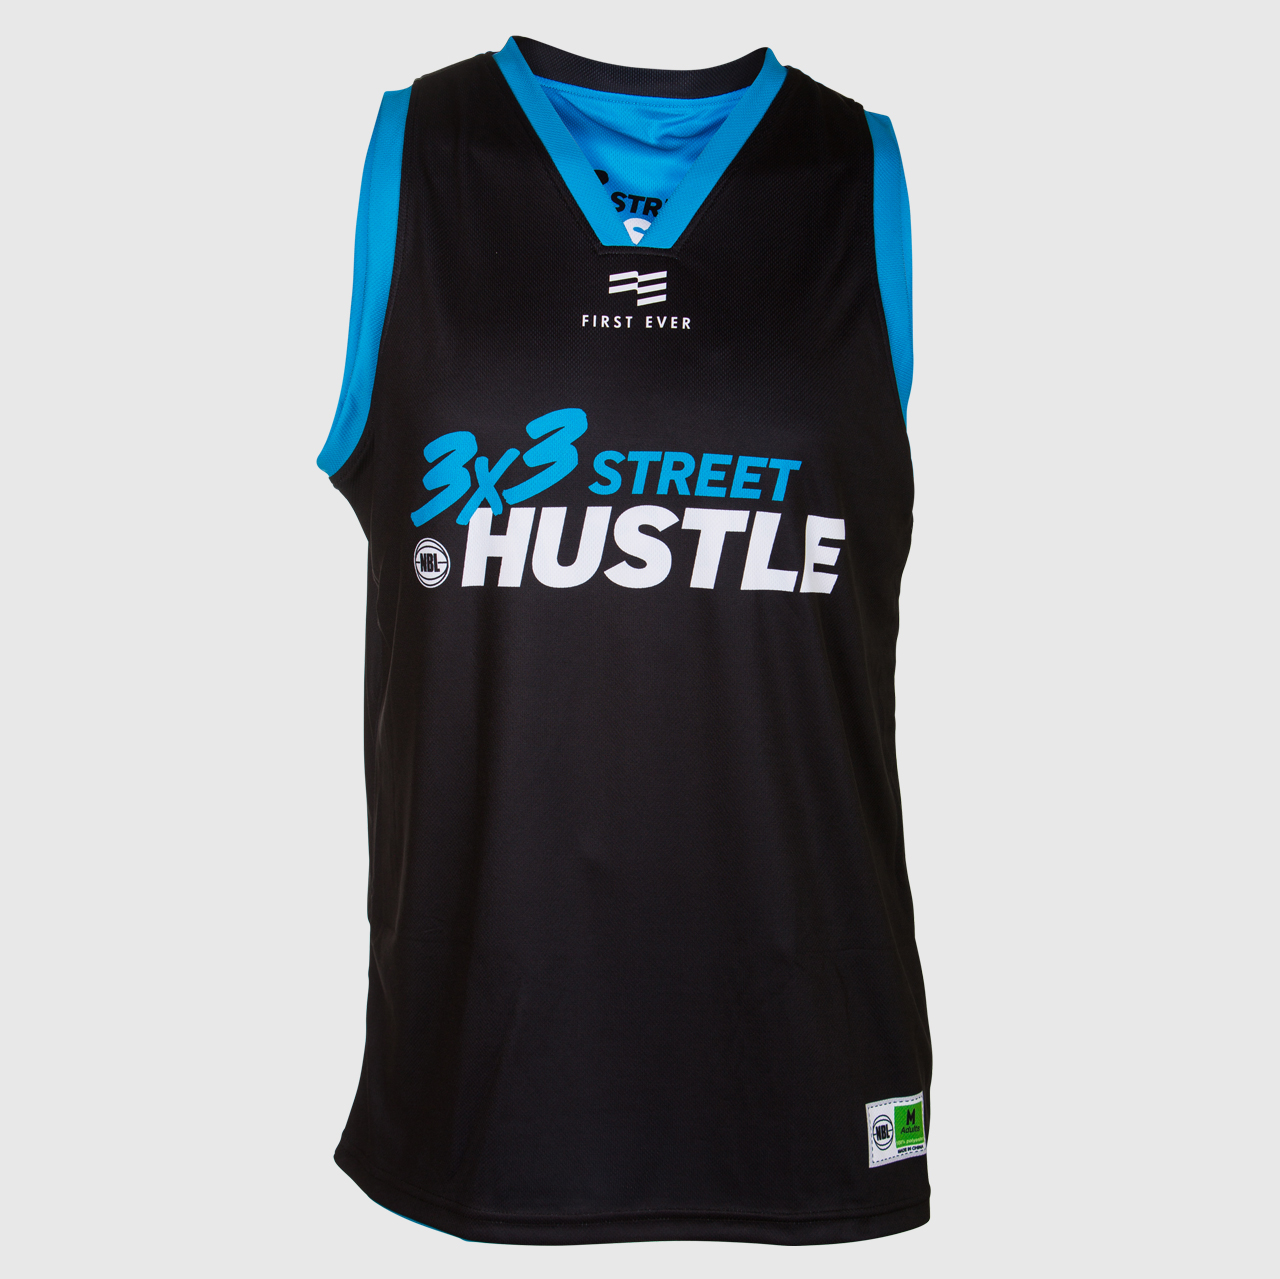 What's Your Hustle? Game Night Basketball Jersey (Desert Sand